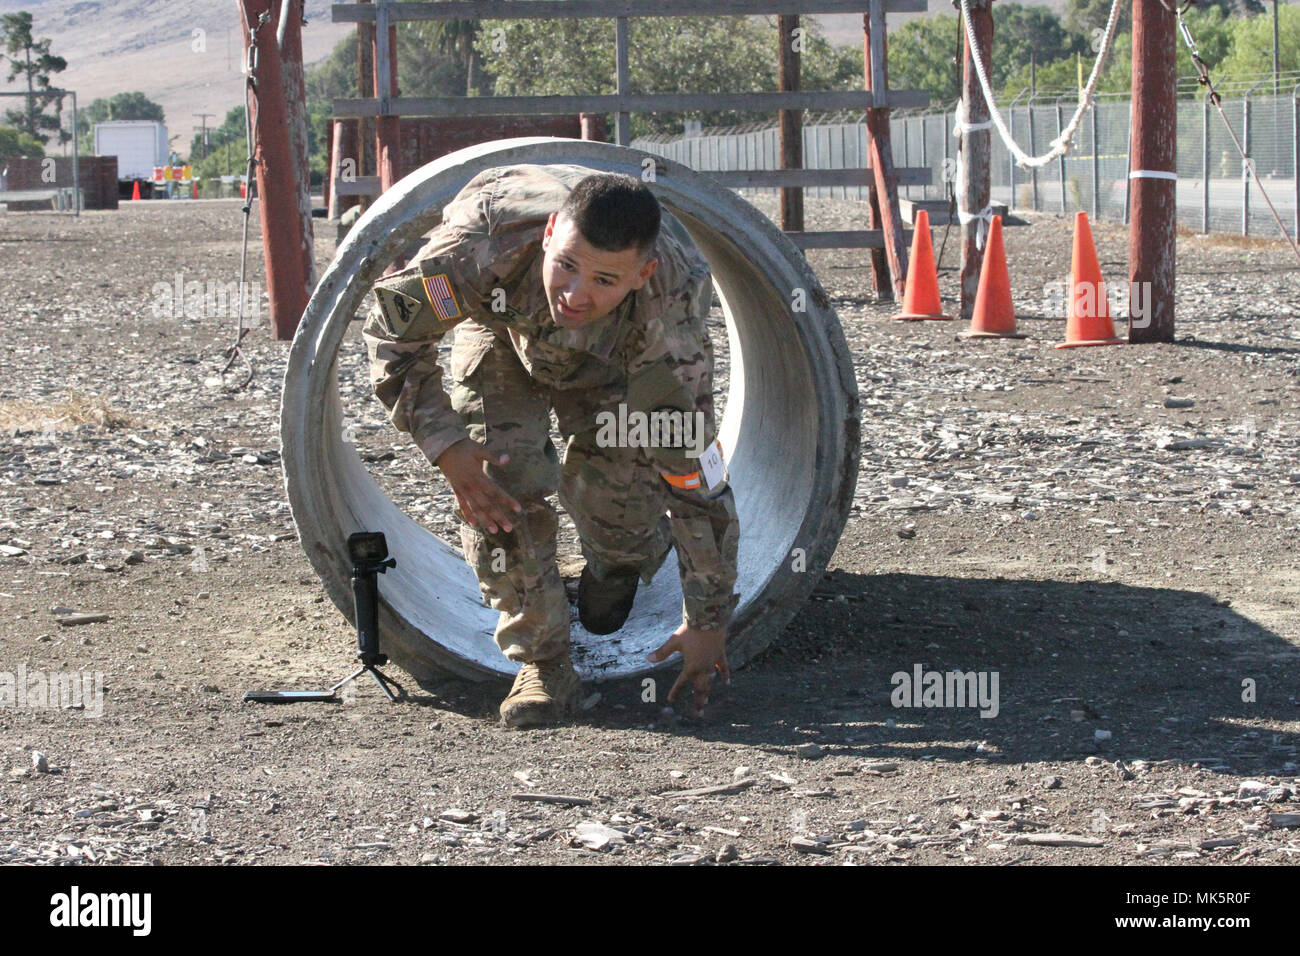 Sgt. George Ruiz exits a tunnel in the obstacle course of the California Army National Guard's 2017-18 Best Warrior Competition at Camp San Luis Obispo, California. (Army National Guard photo by Staff Sgt. Eddie Siguenza) Stock Photo